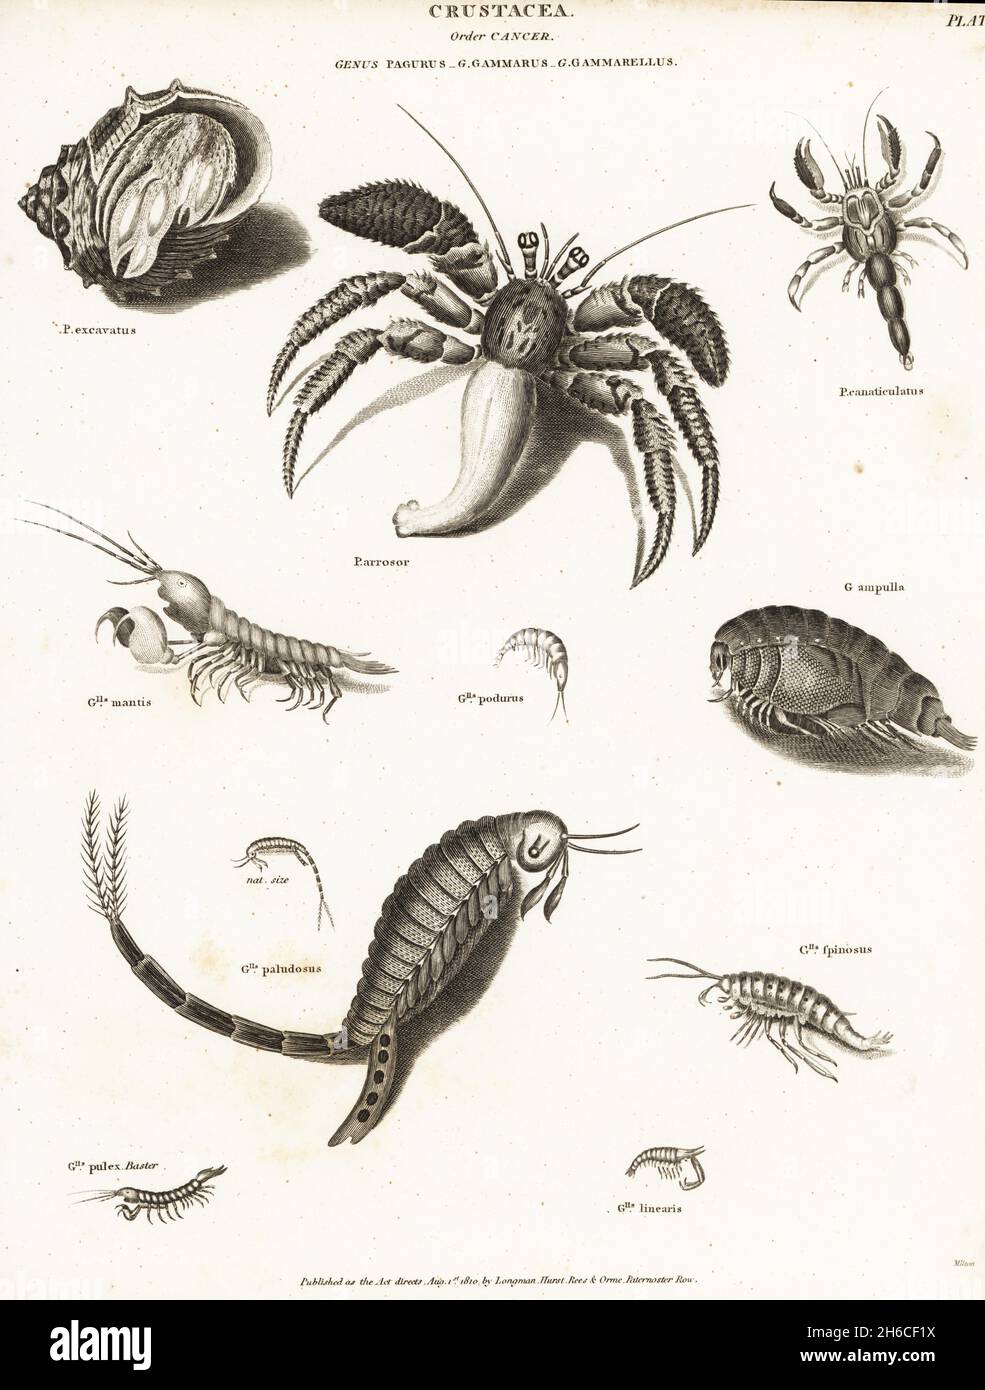 Red reef hermit, Dardanus arrosor, hermit crabs, Cancellus canaliculatus and Pagurus excavatus in shell, mantis shrimp, Squilla mantis, and amphipods, Gammarus ampullas, Gammarellus paludosus, Gammarellus spinosus, etc. Copperplate engraving by Milton from Abraham Rees' Cyclopedia or Universal Dictionary of Arts, Sciences and Literature, Longman, Hurst, Rees, Orme and Brown, London, 1810. Stock Photo